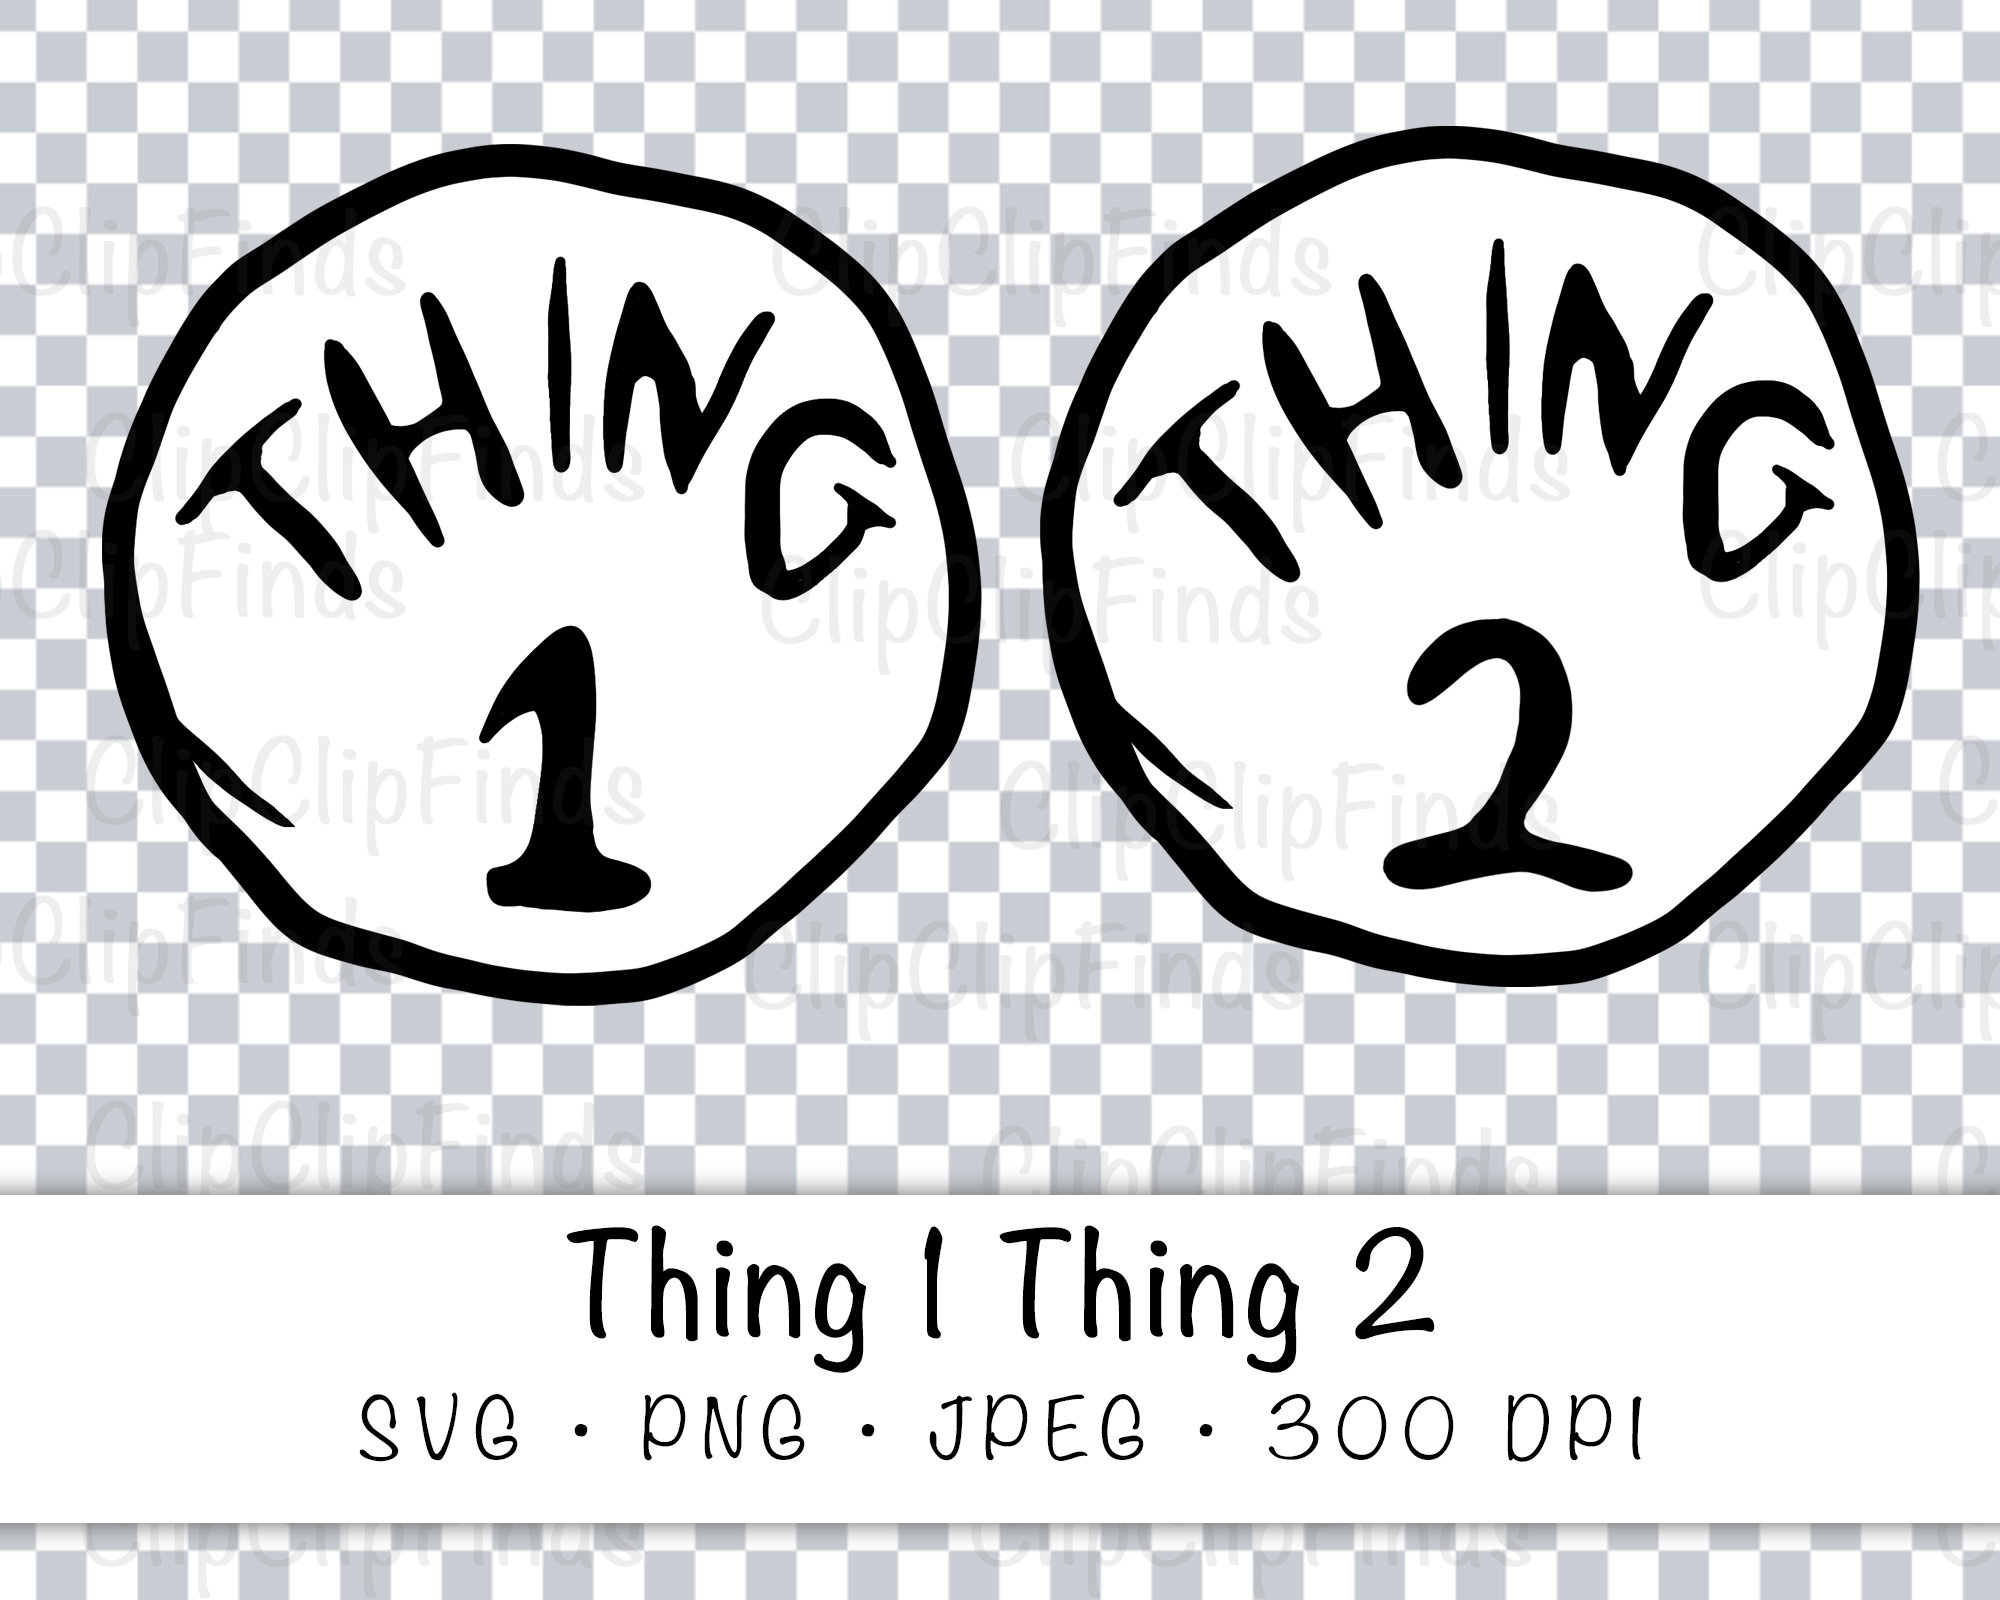 thing-1-and-2-logo-svg